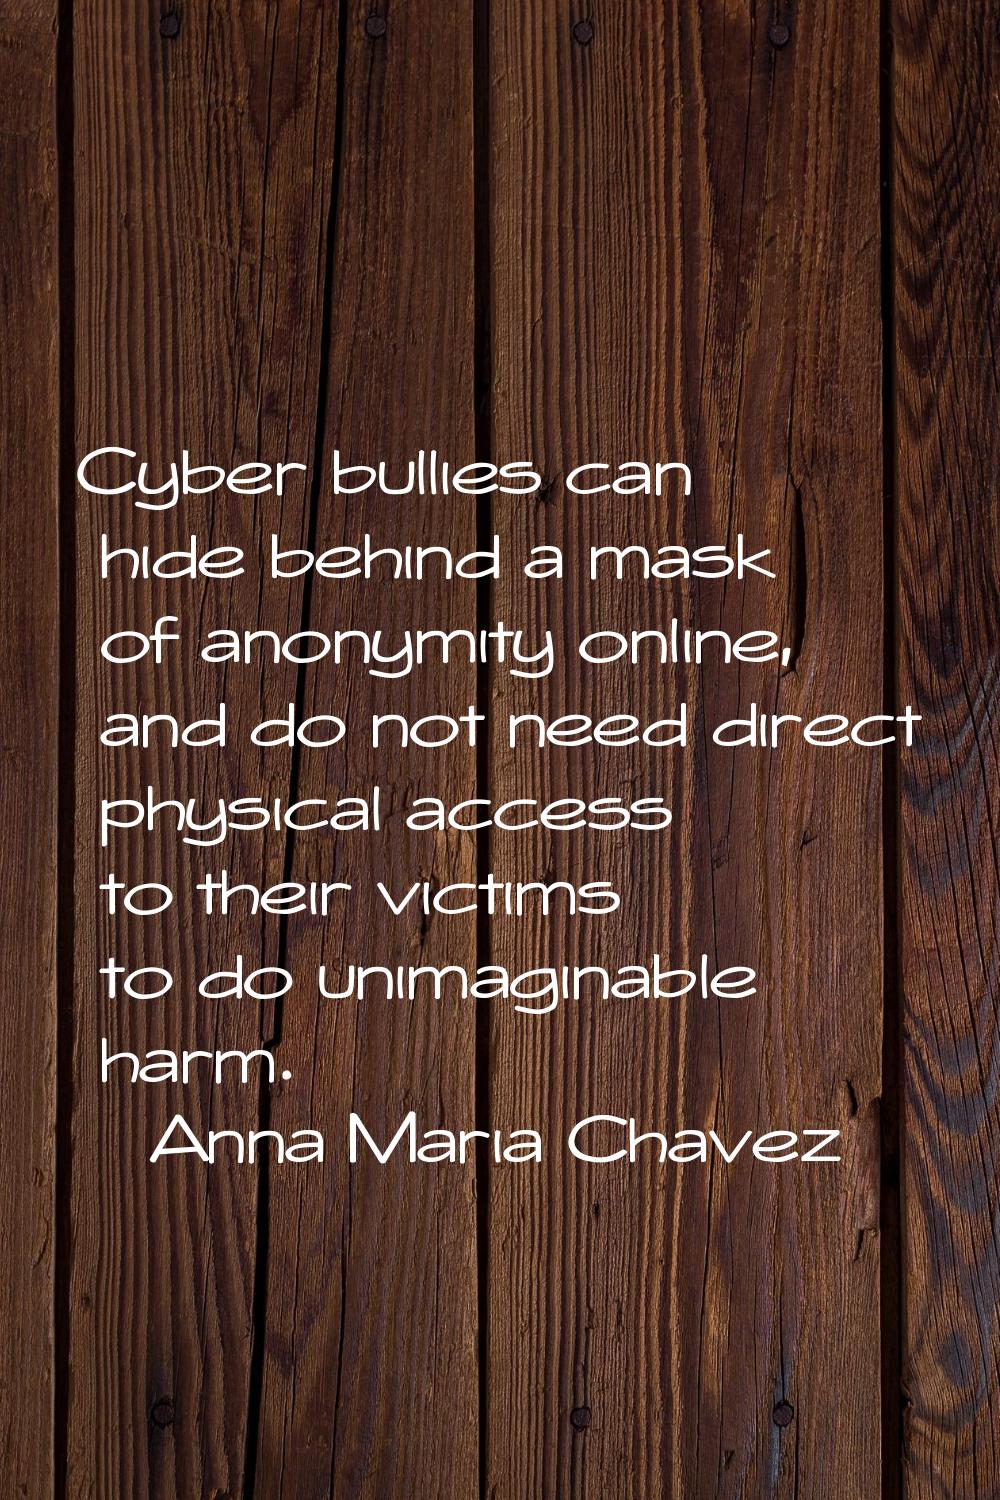 Cyber bullies can hide behind a mask of anonymity online, and do not need direct physical access to